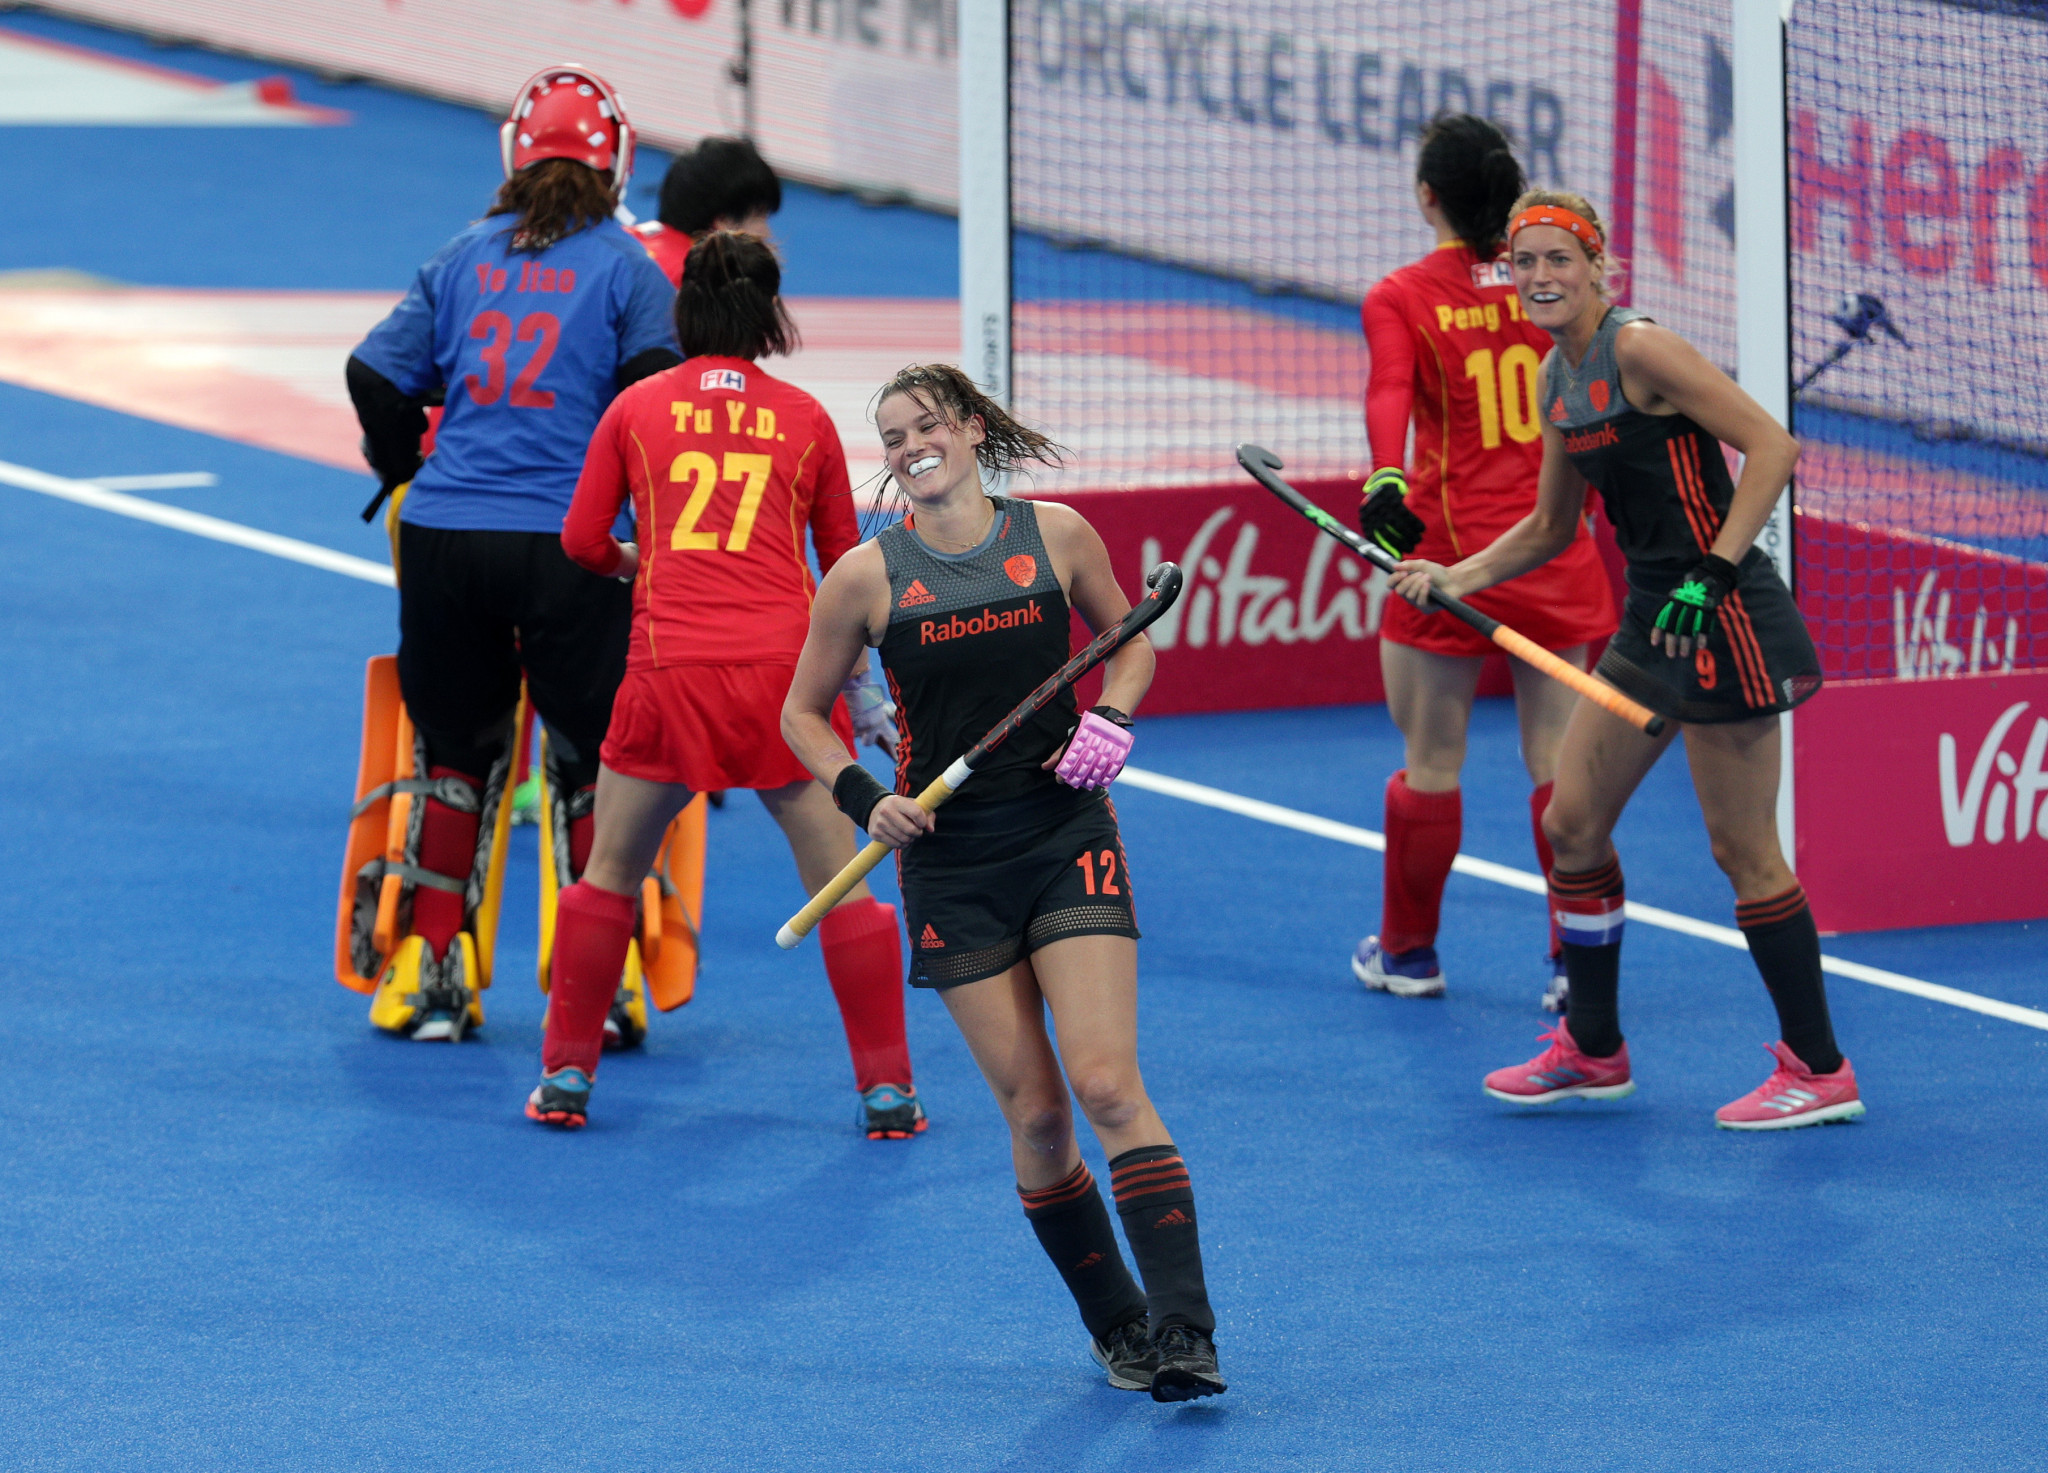 Defending champions Netherlands continue impressive start at Women's Hockey World Cup